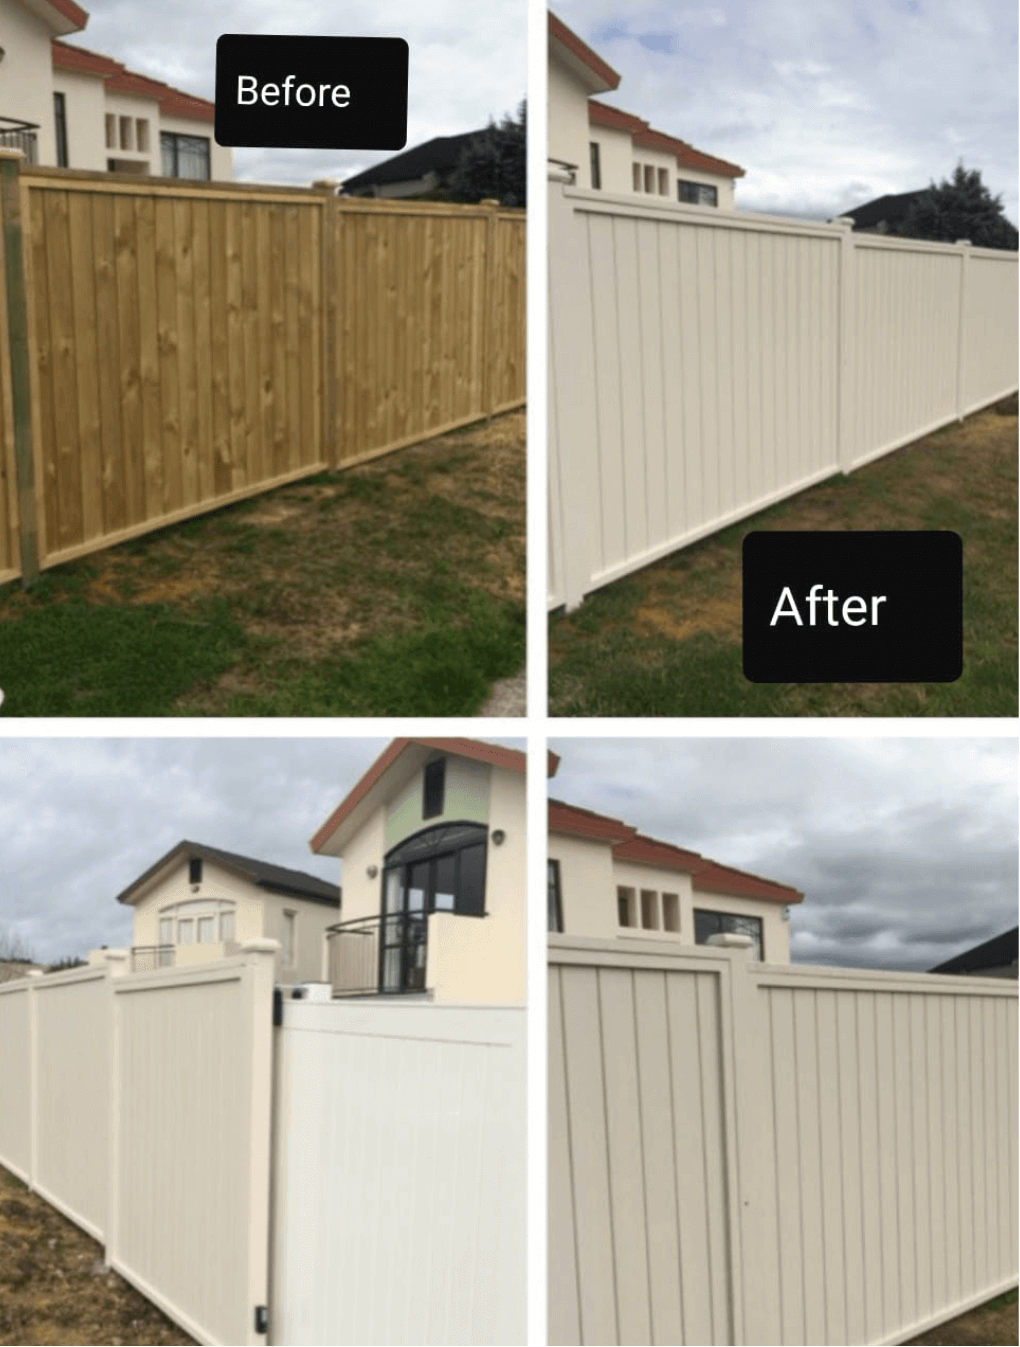 Fence painting before and after photos